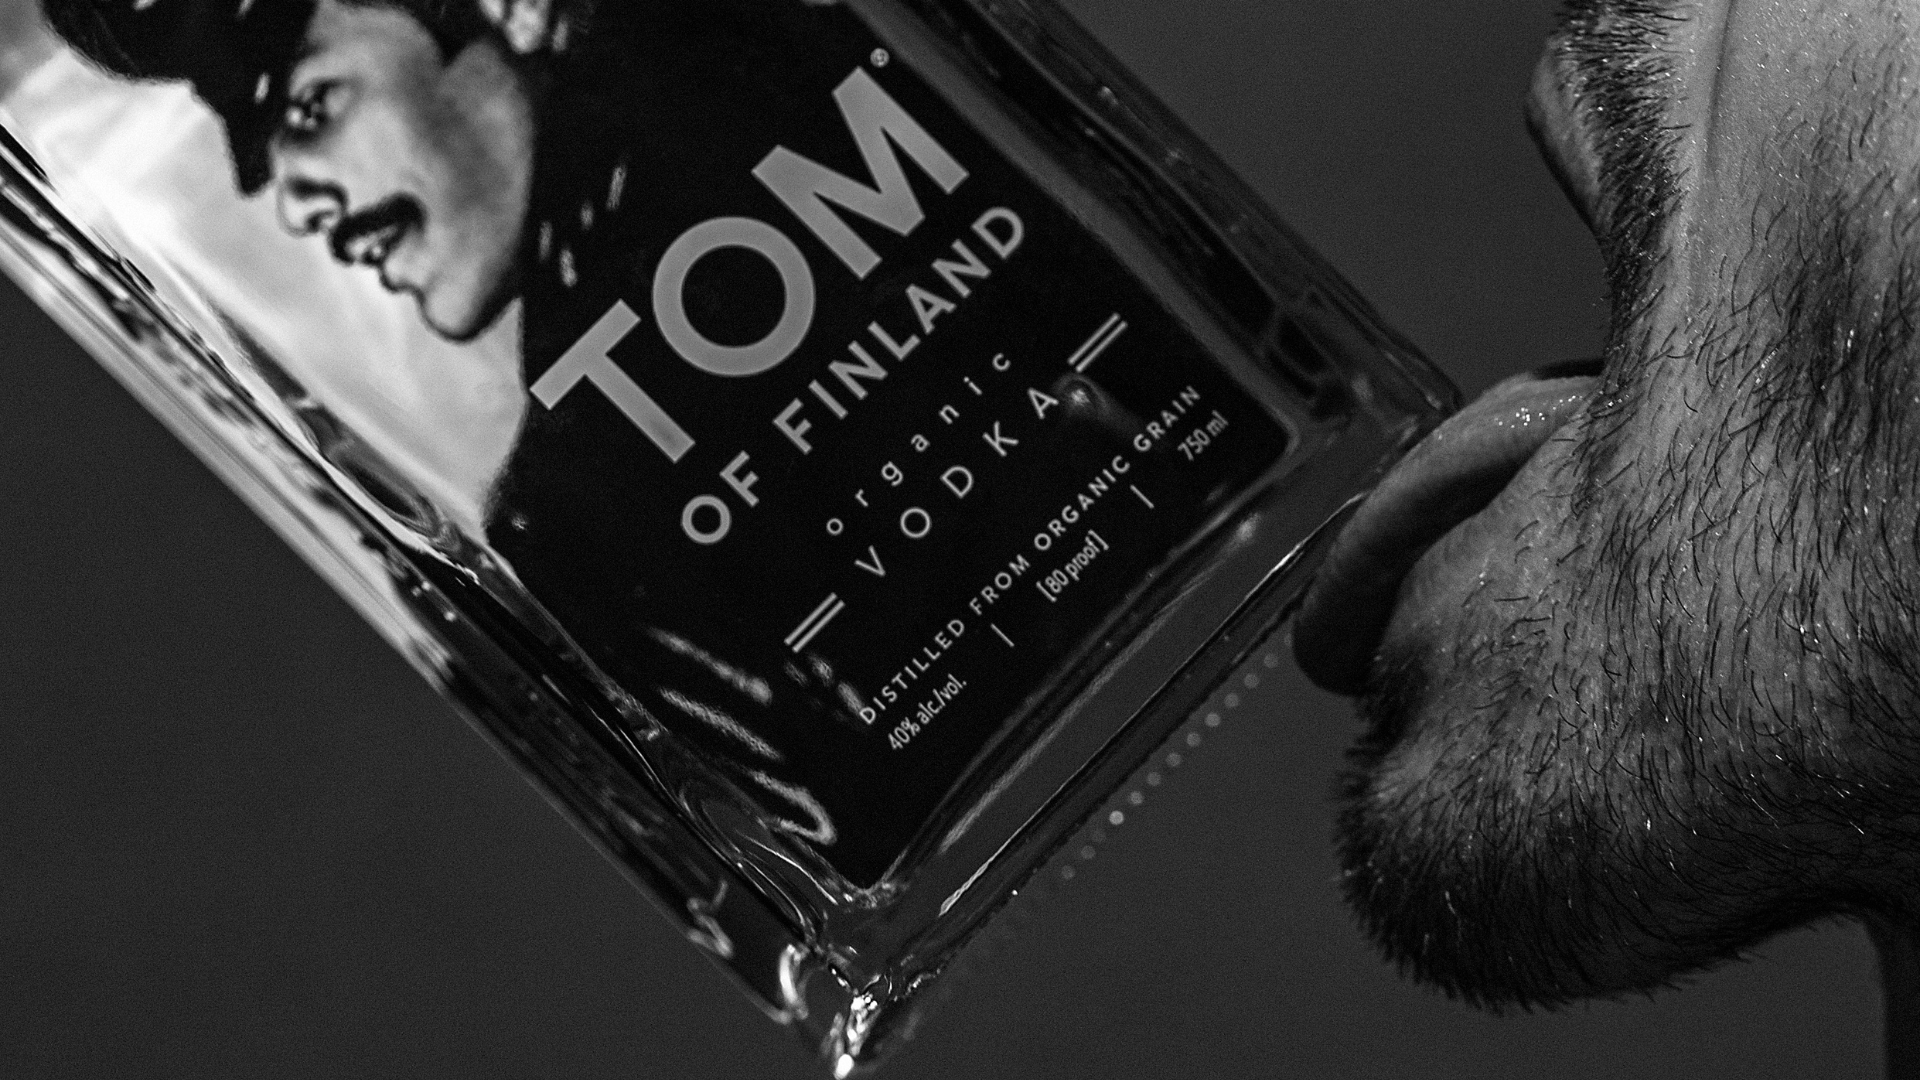 Tom of Finland Organic Vodka® sponsors photo competition and charity auction